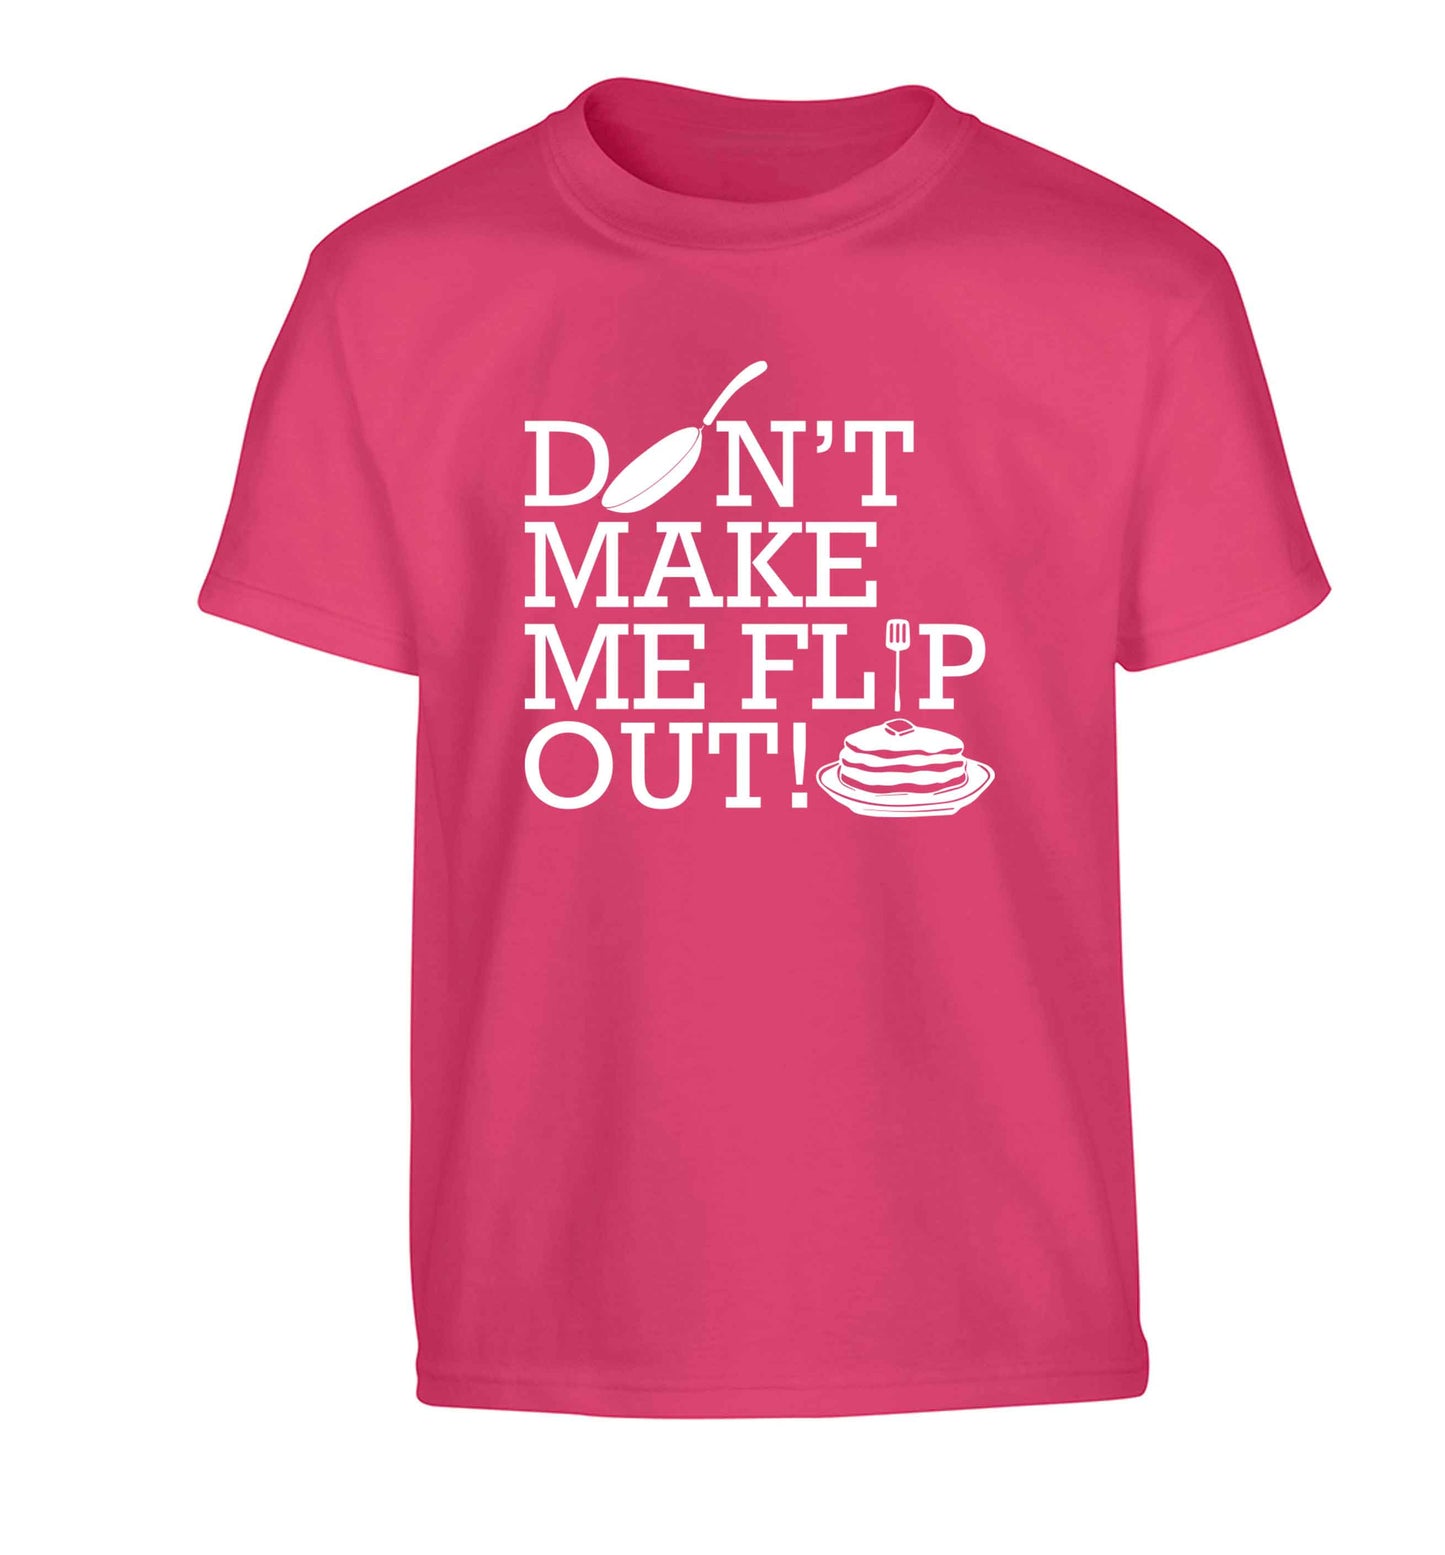 Don't make me flip out Children's pink Tshirt 12-13 Years